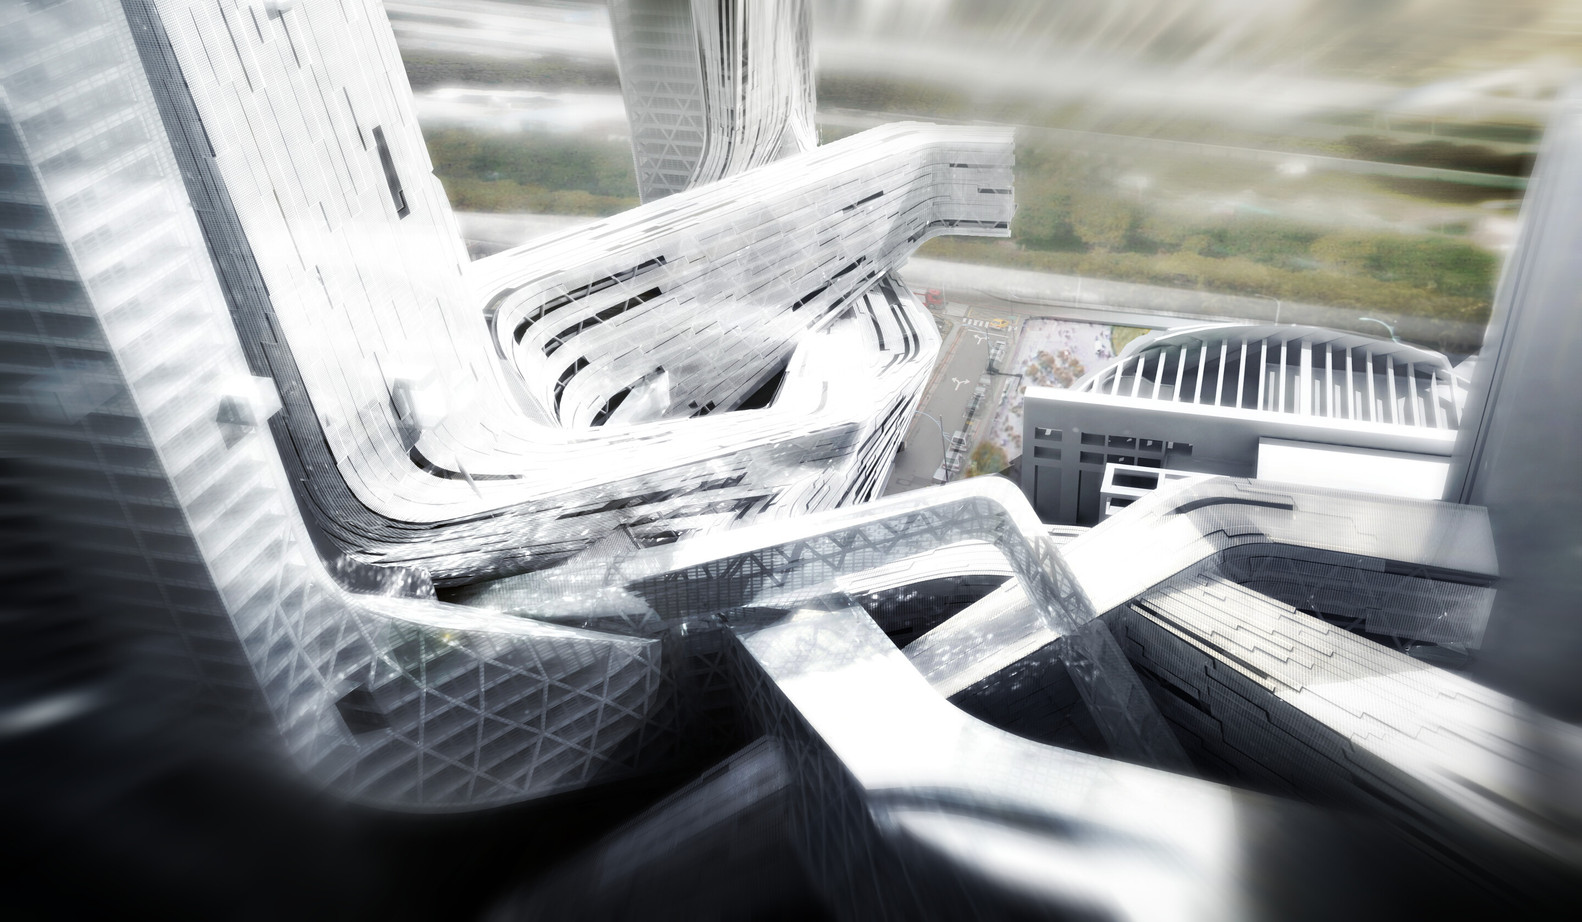 Interview With Thom Mayne: “I Am a Pragmatic Idealist”,Four-Towers-in-One competition proposal for Shenzhen. Image Courtesy of Morphosis